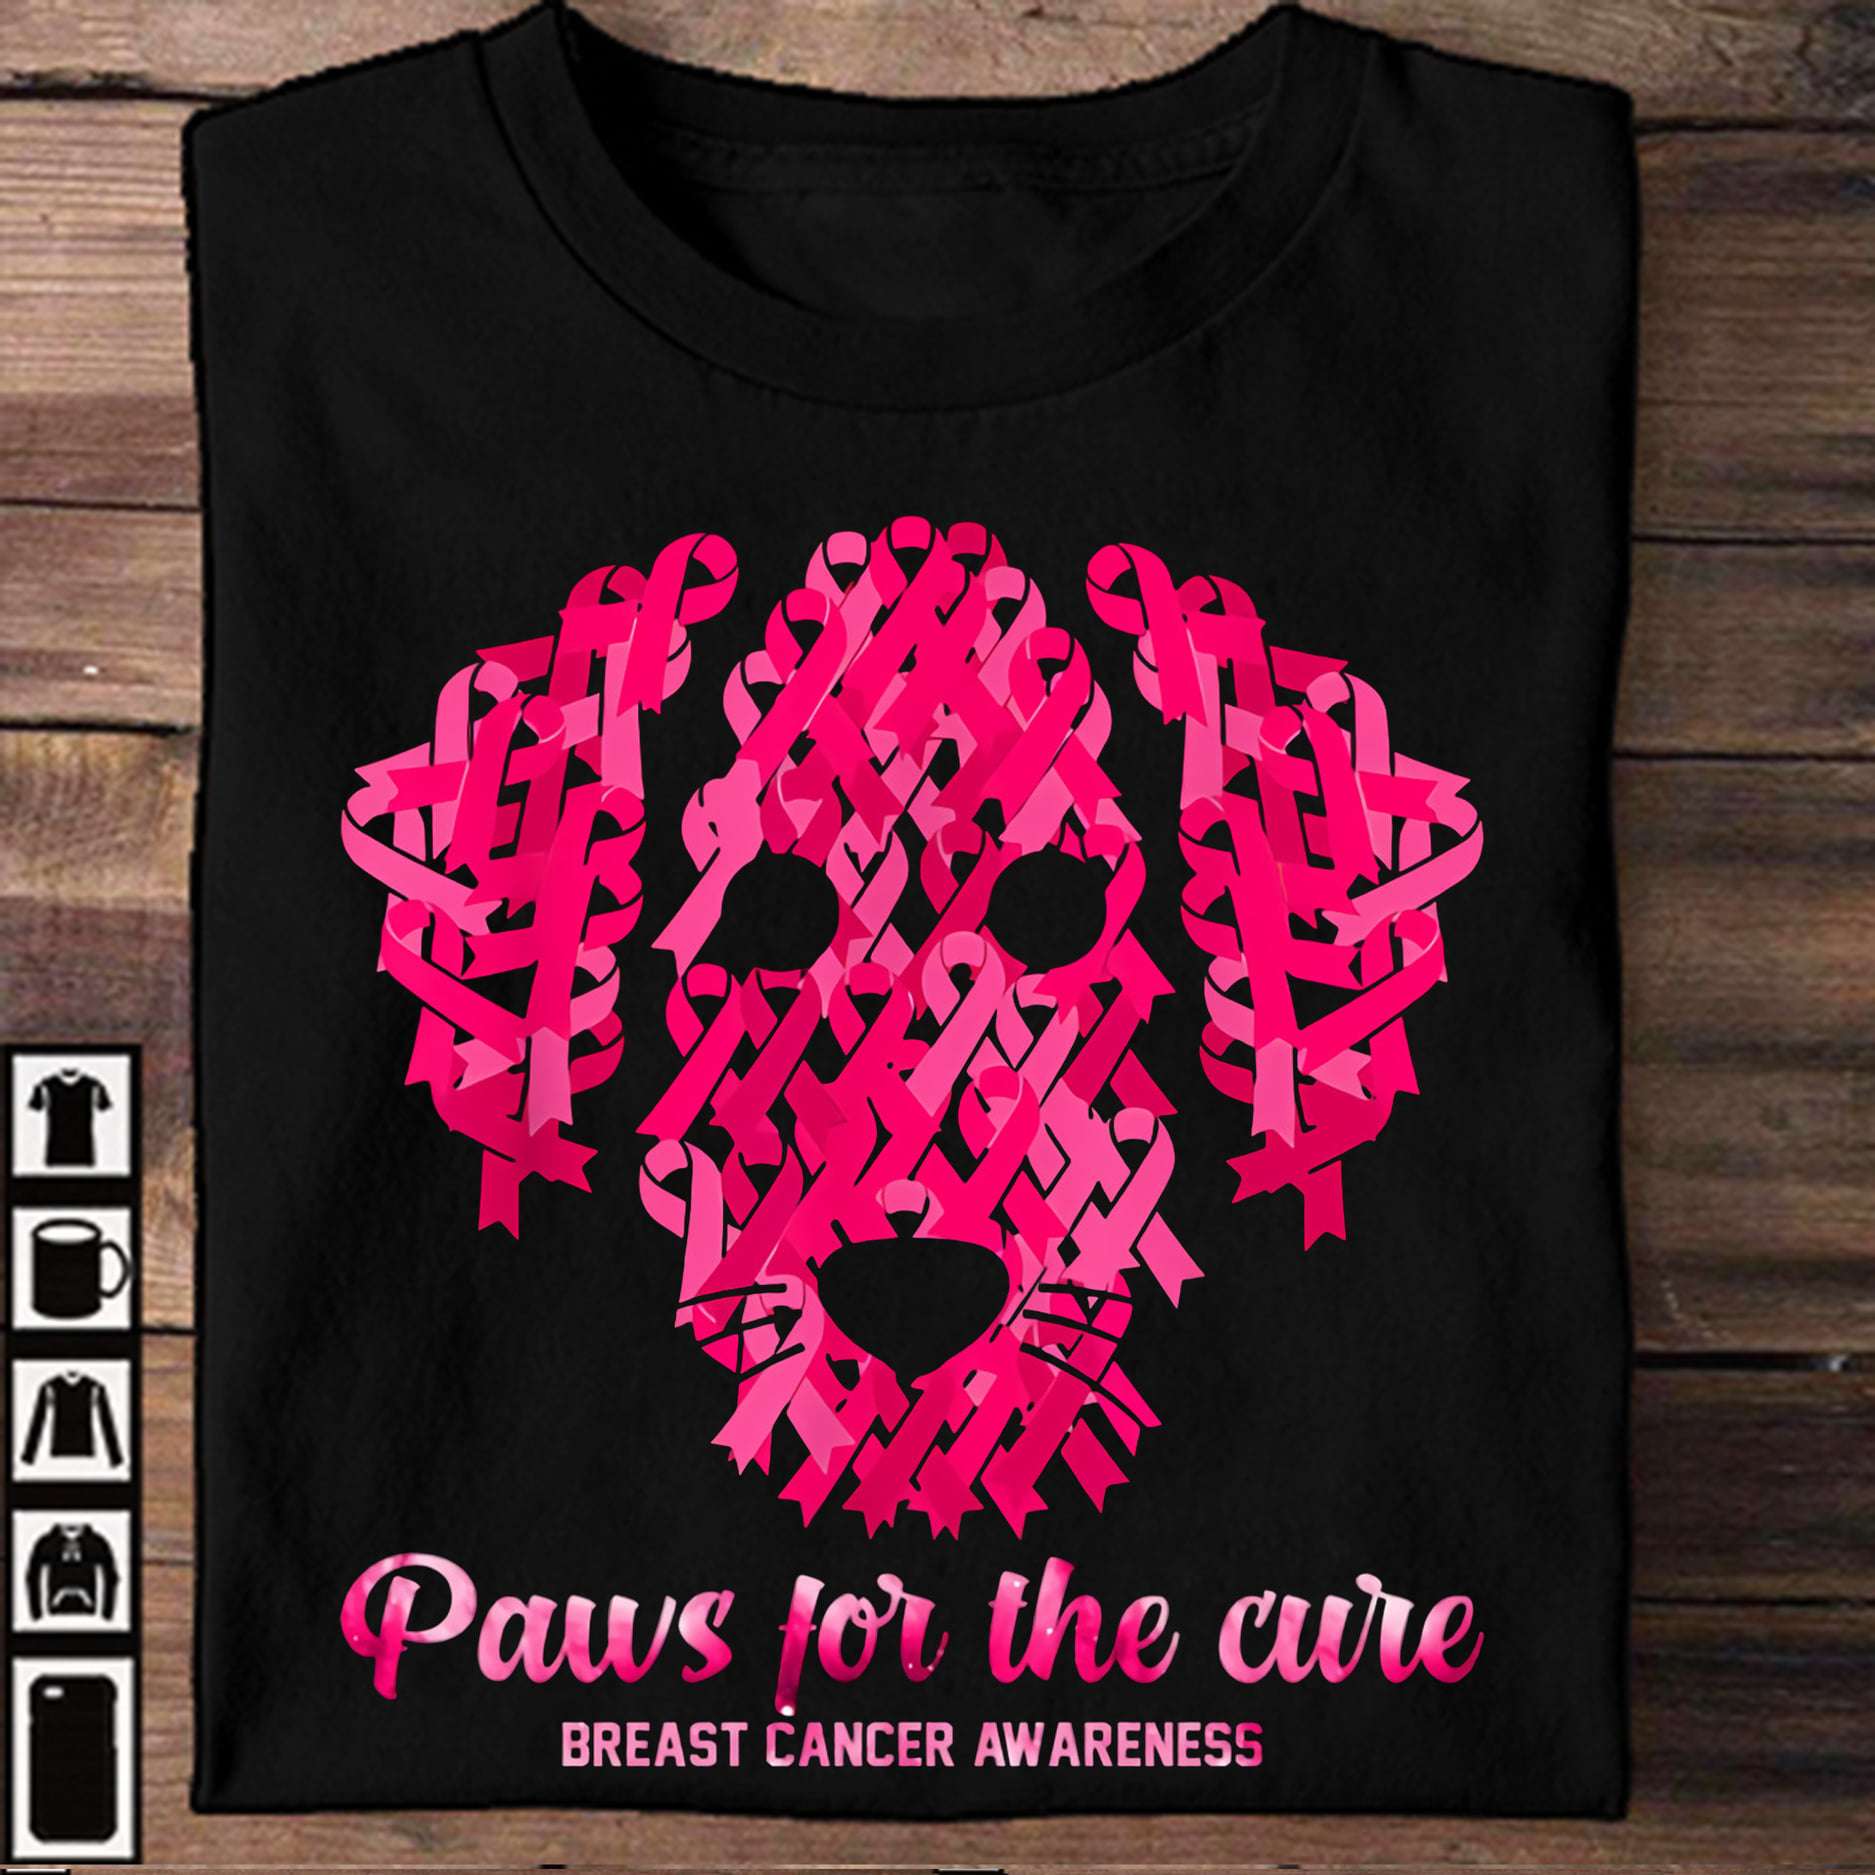 Paws for the cure - Breast cancer awareness, Dog cancer ribbon